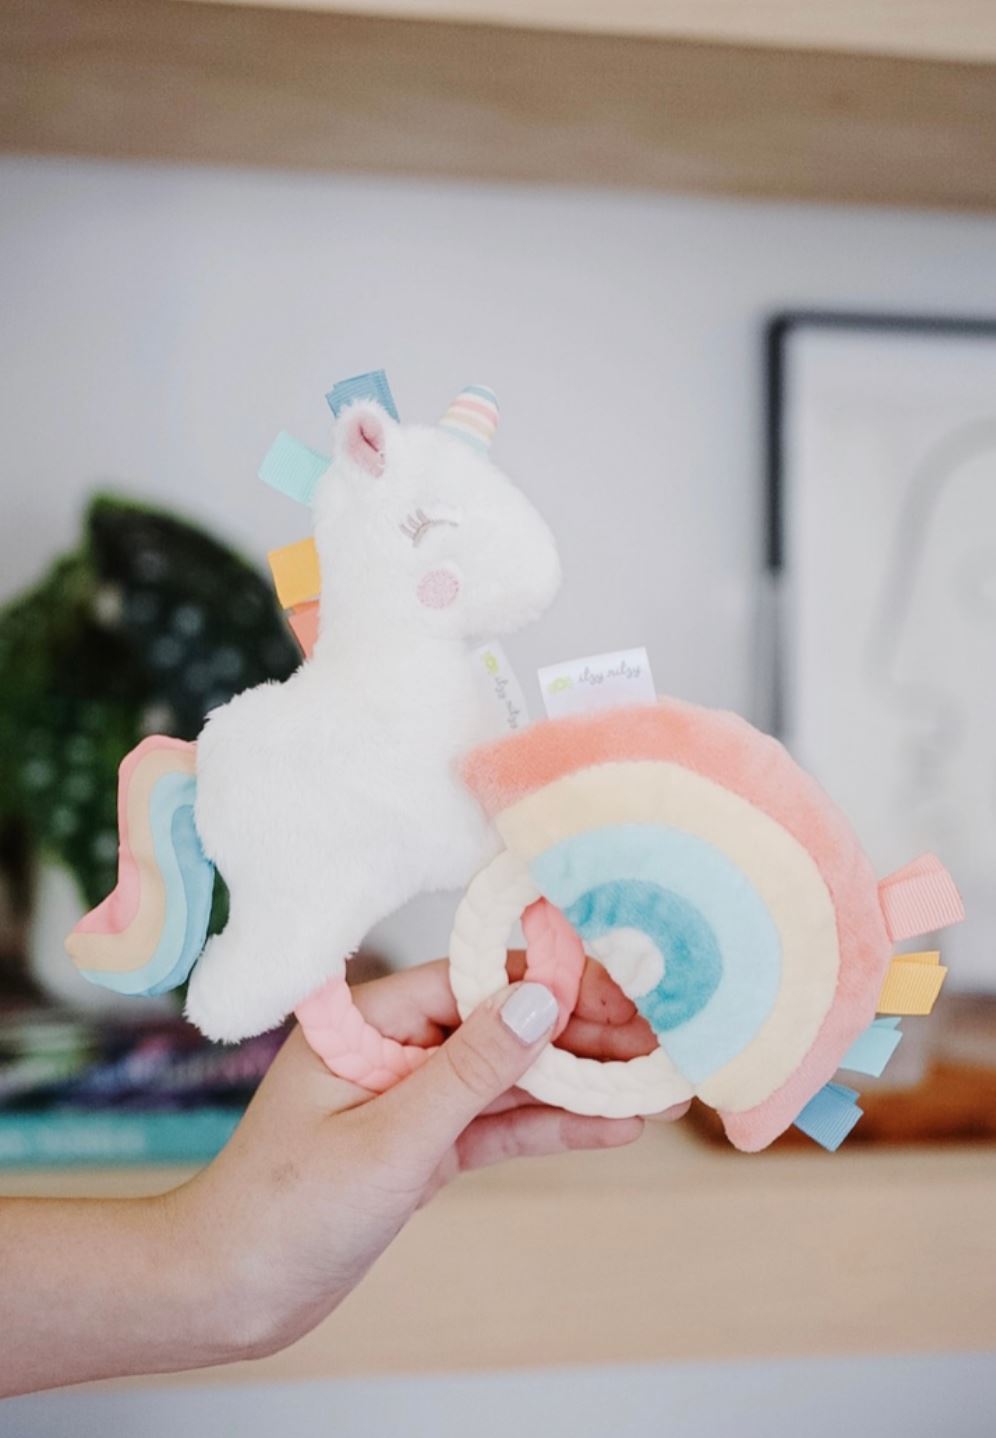 Ritzy Rattle Pal Plush Rattle Pal with Teether - Unicorn